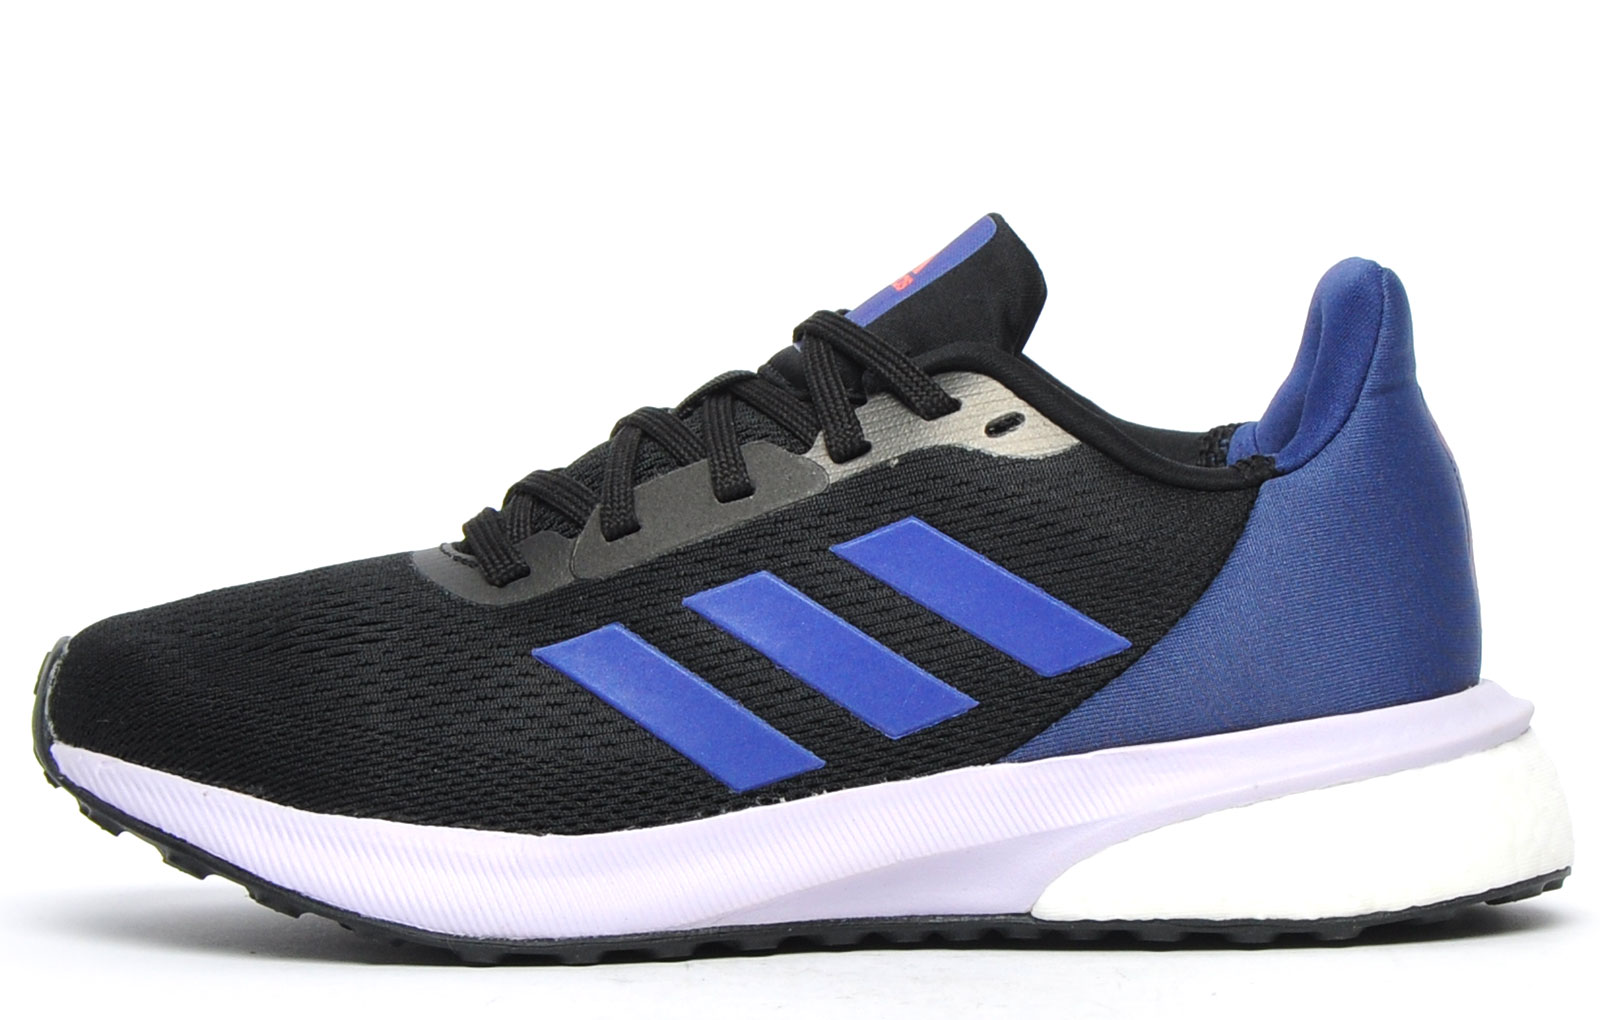 Adidas Astra Run Boost Womens Trainers